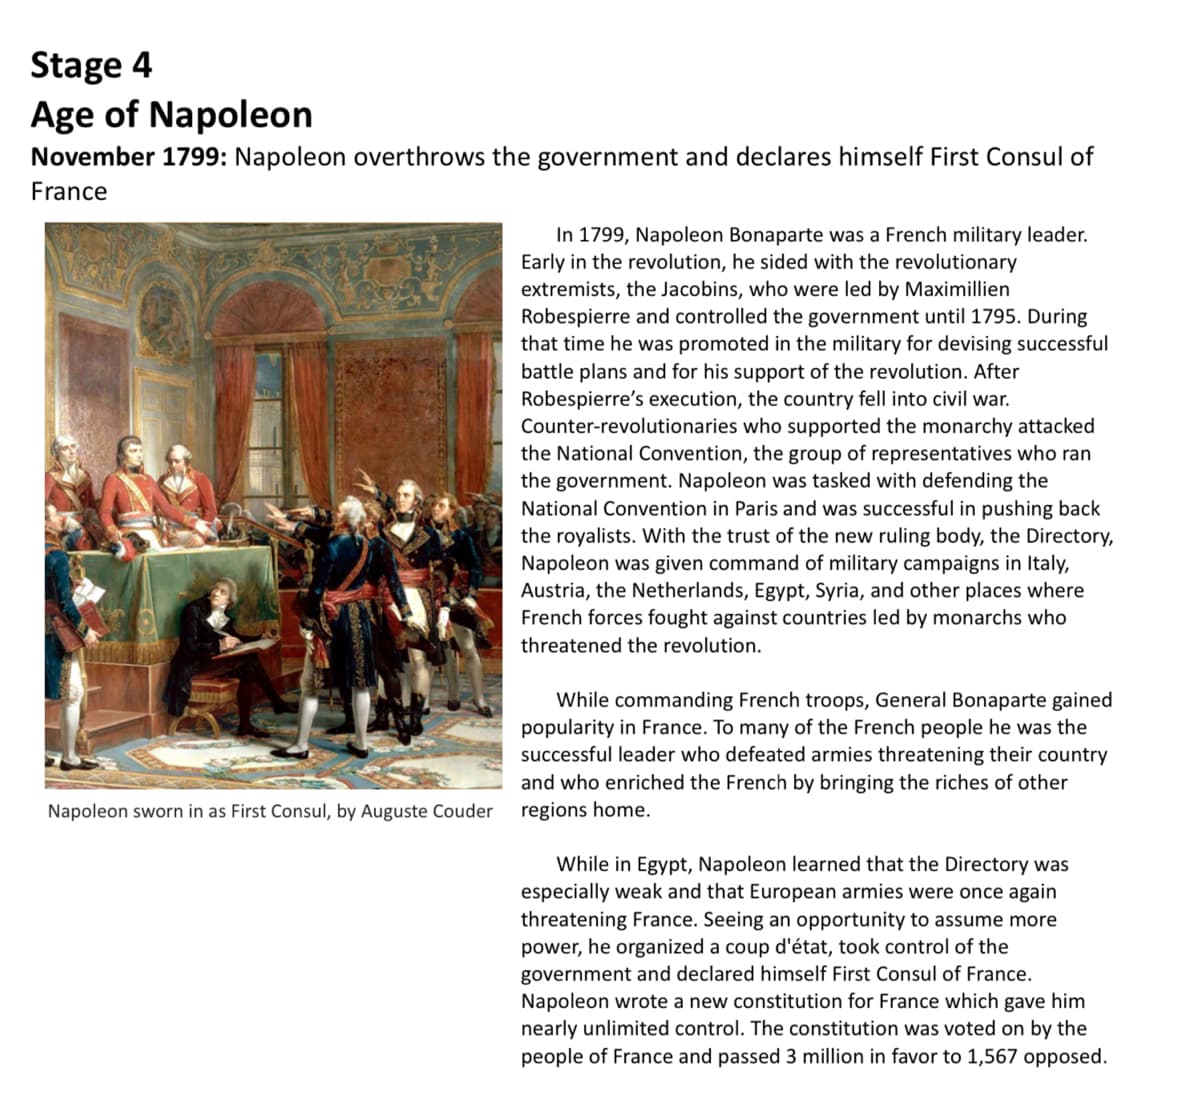 Stage 4
Age of Napoleon
November 1799: Napoleon overthrows the government and declares himself First Consul of
France
In 1799, Napoleon Bonaparte was a French military leader.
Early in the revolution, he sided with the revolutionary
extremists, the Jacobins, who were led by Maximillien
Robespierre and controlled the government until 1795. During
that time he was promoted in the military for devising successful
battle plans and for his support of the revolution. After
Robespierre's execution, the country fell into civil war.
Counter-revolutionaries who supported the monarchy attacked
the National Convention, the group of representatives who ran
the government. Napoleon was tasked with defending the
National Convention in Paris and was successful in pushing back
the royalists. With the trust of the new ruling body, the Directory,
Napoleon was given command of military campaigns in Italy,
Austria, the Netherlands, Egypt, Syria, and other places where
French forces fought against countries led by monarchs who
threatened the revolution.
While commanding French troops, General Bonaparte gained
popularity in France. To many of the French people he was the
successful leader who defeated armies threatening their country
and who enriched the French by bringing the riches of other
Napoleon sworn in as First Consul, by Auguste Couder
regions home.
While in Egypt, Napoleon learned that the Directory was
especially weak and that European armies were once again
threatening France. Seeing an opportunity to assume more
power, he organized a coup d'état, took control of the
government and declared himself First Consul of France.
Napoleon wrote a new constitution for France which gave him
nearly unlimited control. The constitution was voted on by the
people of France and passed 3 million in favor to 1,567 opposed.
